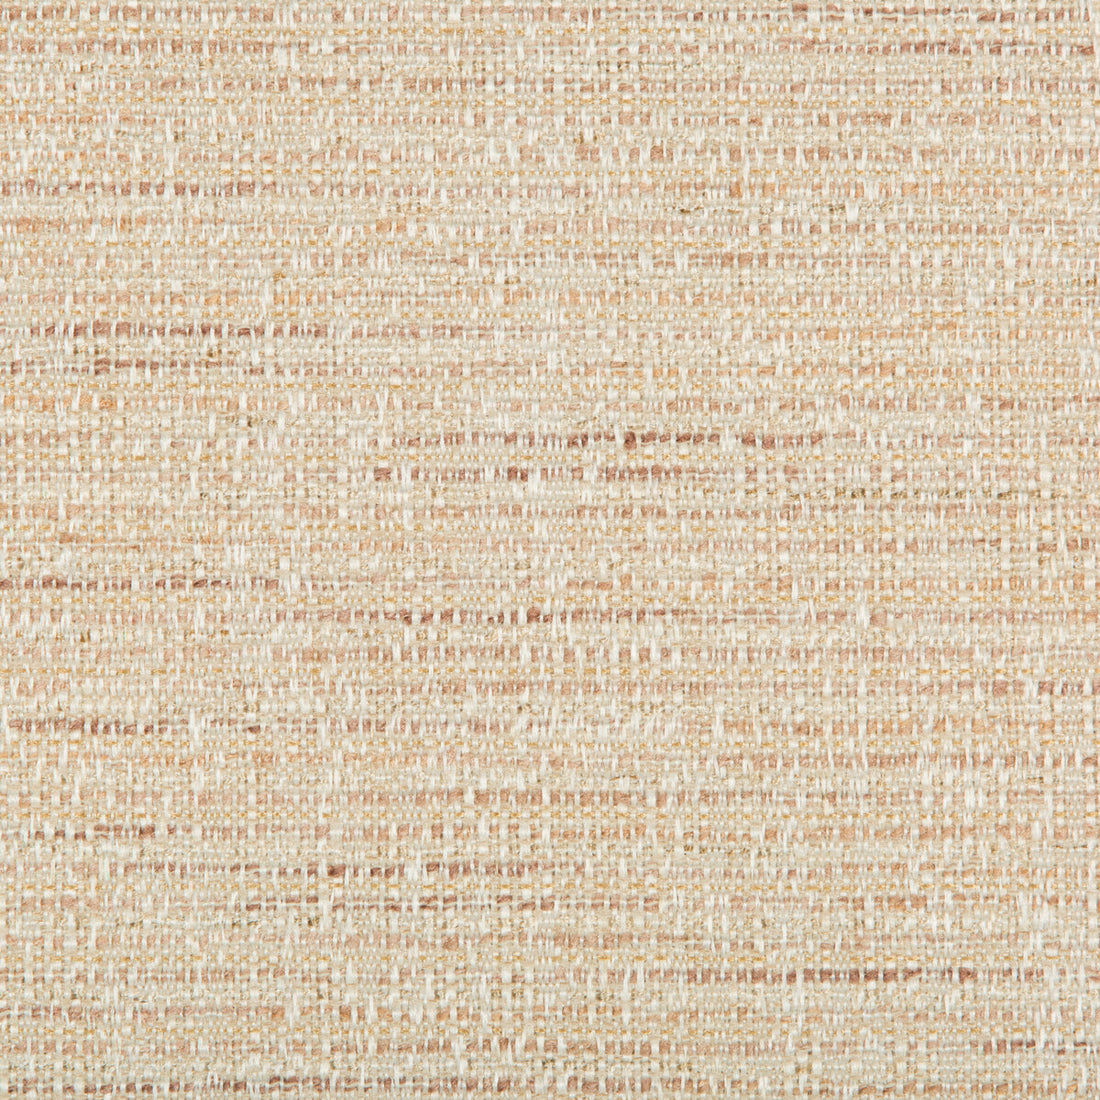 Kravet Smart fabric in 35396-112 color - pattern 35396.112.0 - by Kravet Smart in the Performance Crypton Home collection